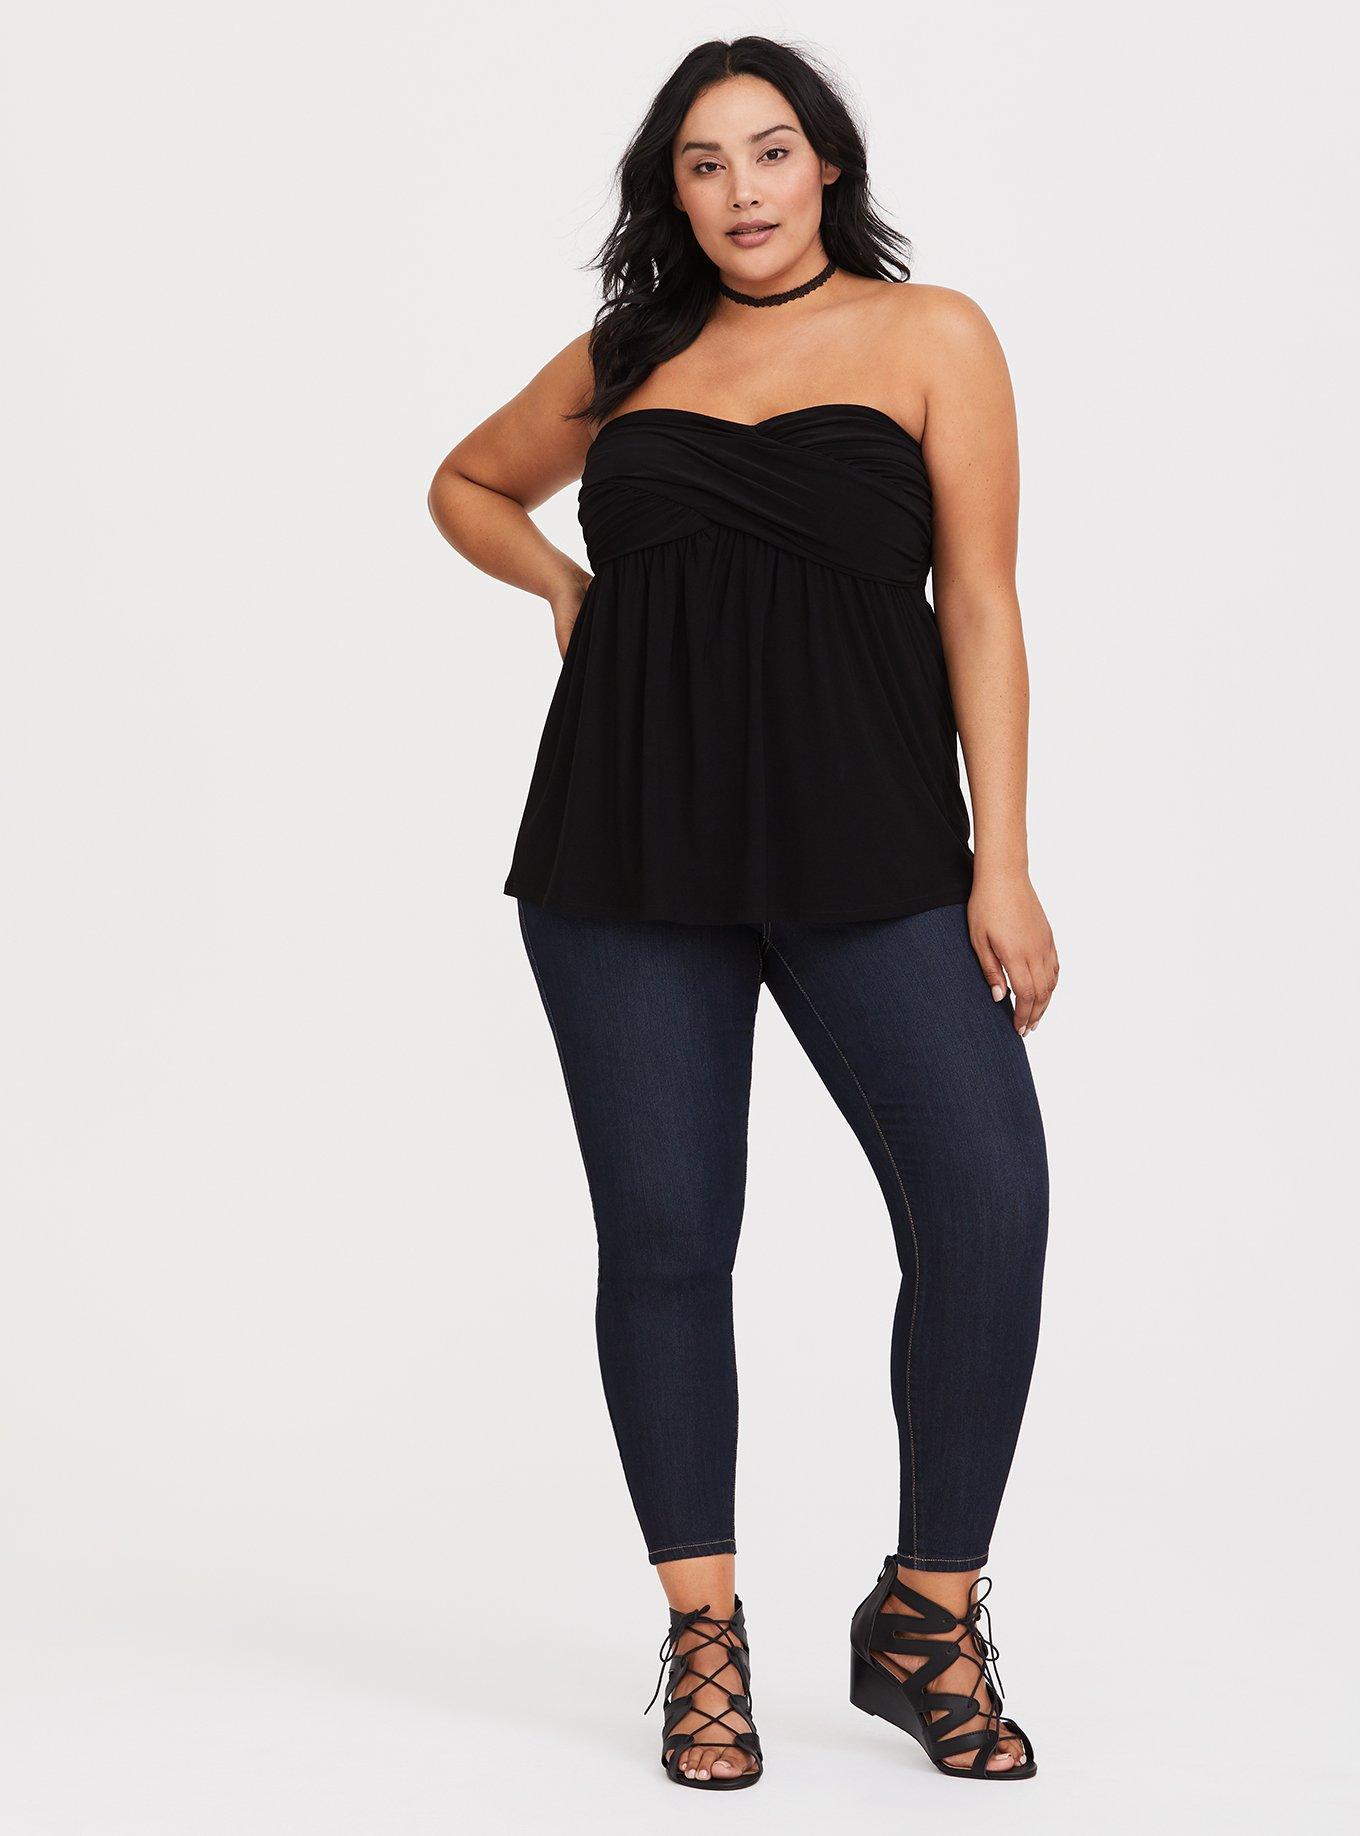 Plus Size - Black Jersey Knit Twisted Tube Top - Torrid